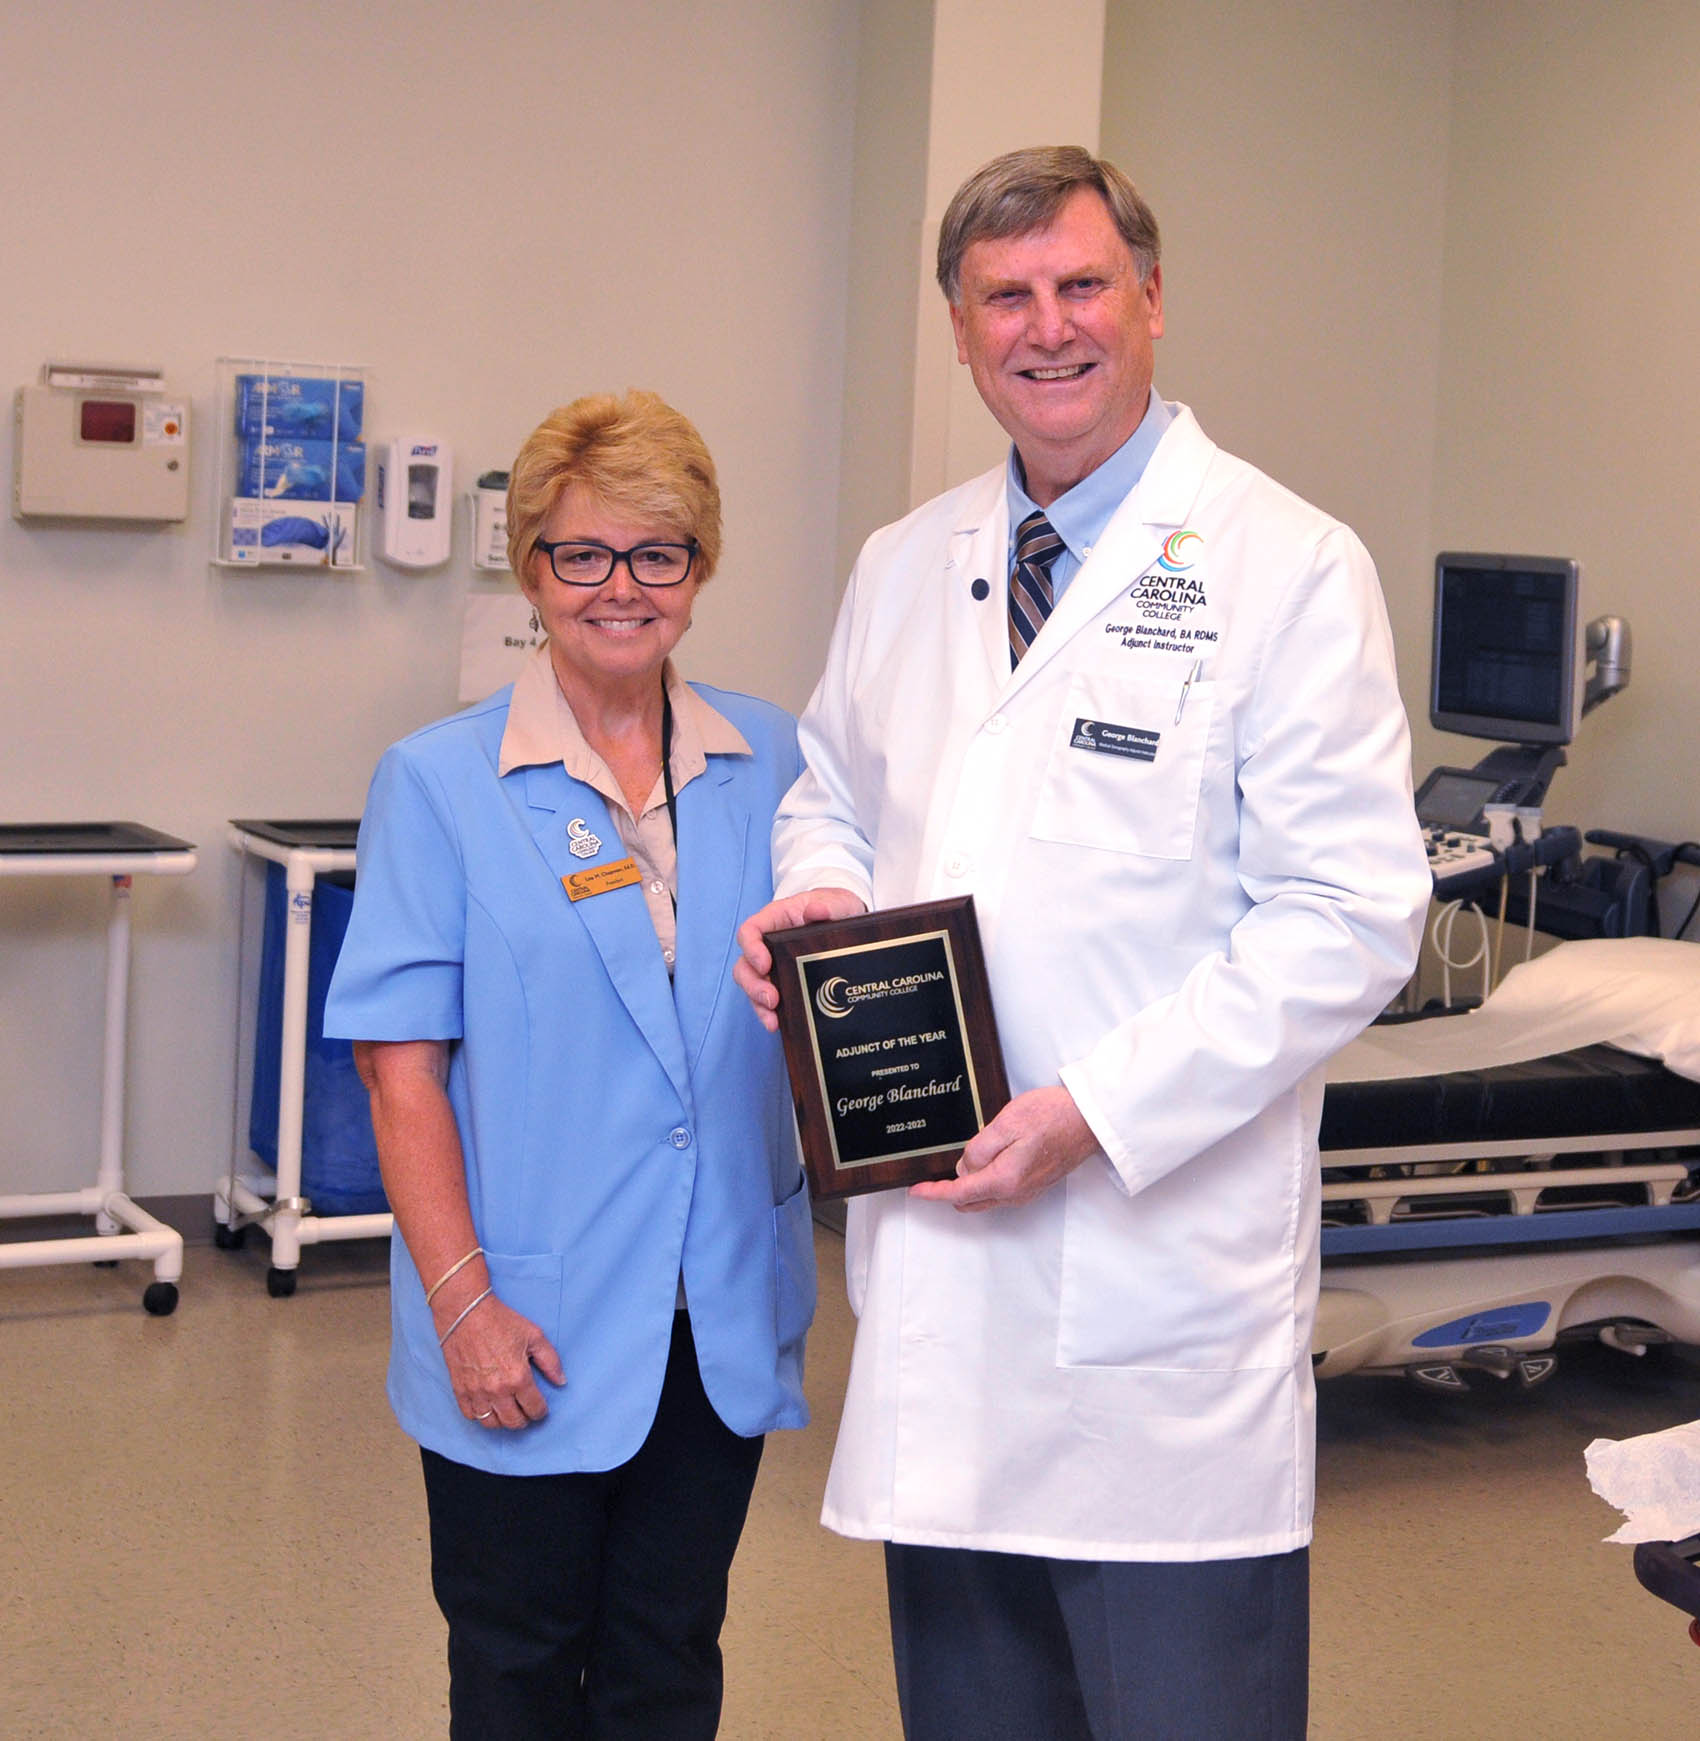 George Blanchard receives CCCC Adjunct of Year Award